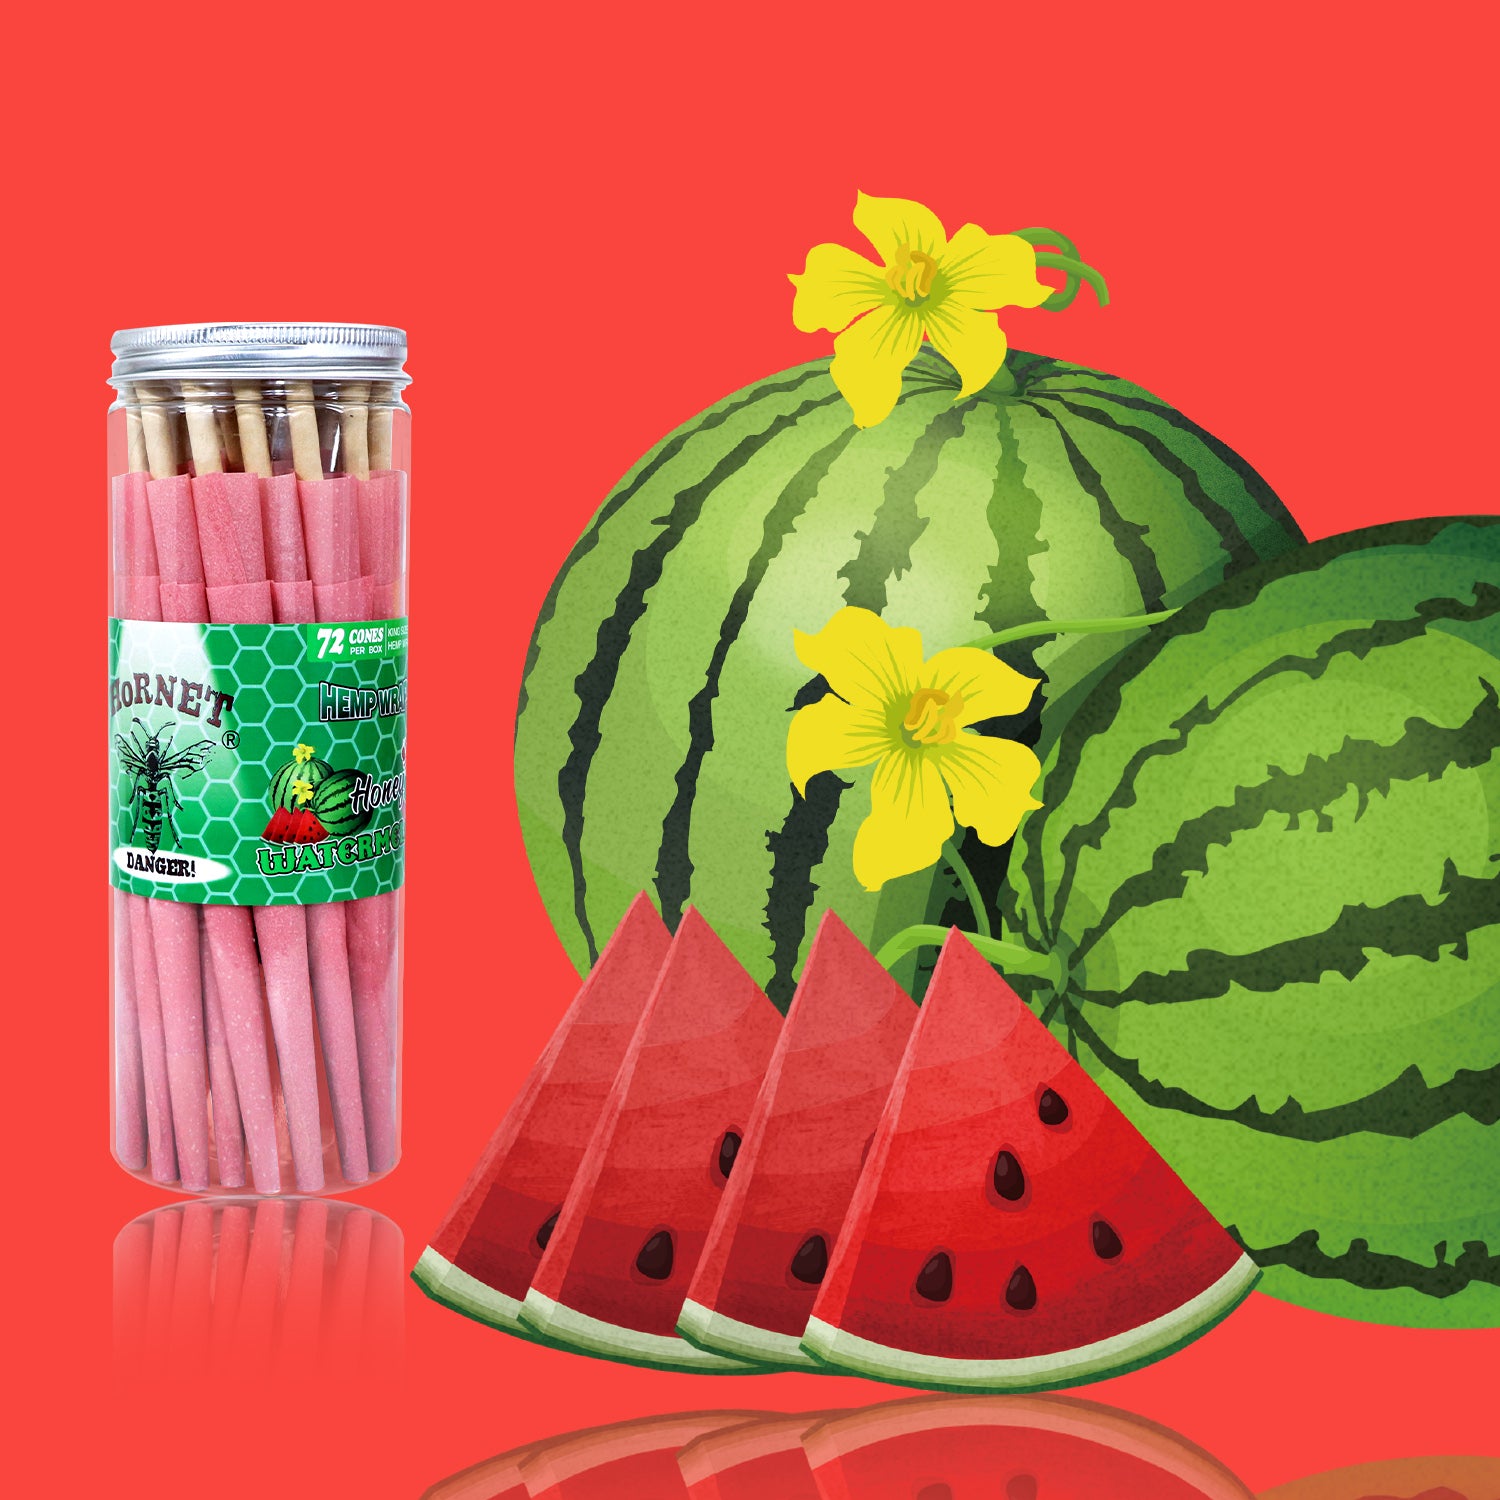 HORNET Watermelon Flavored Pink Pre Rolled Cones, King Size Pre Rolled Rolling Paper with tips, Slow Burning Rolling Cones & load, 72 PCS / Jar